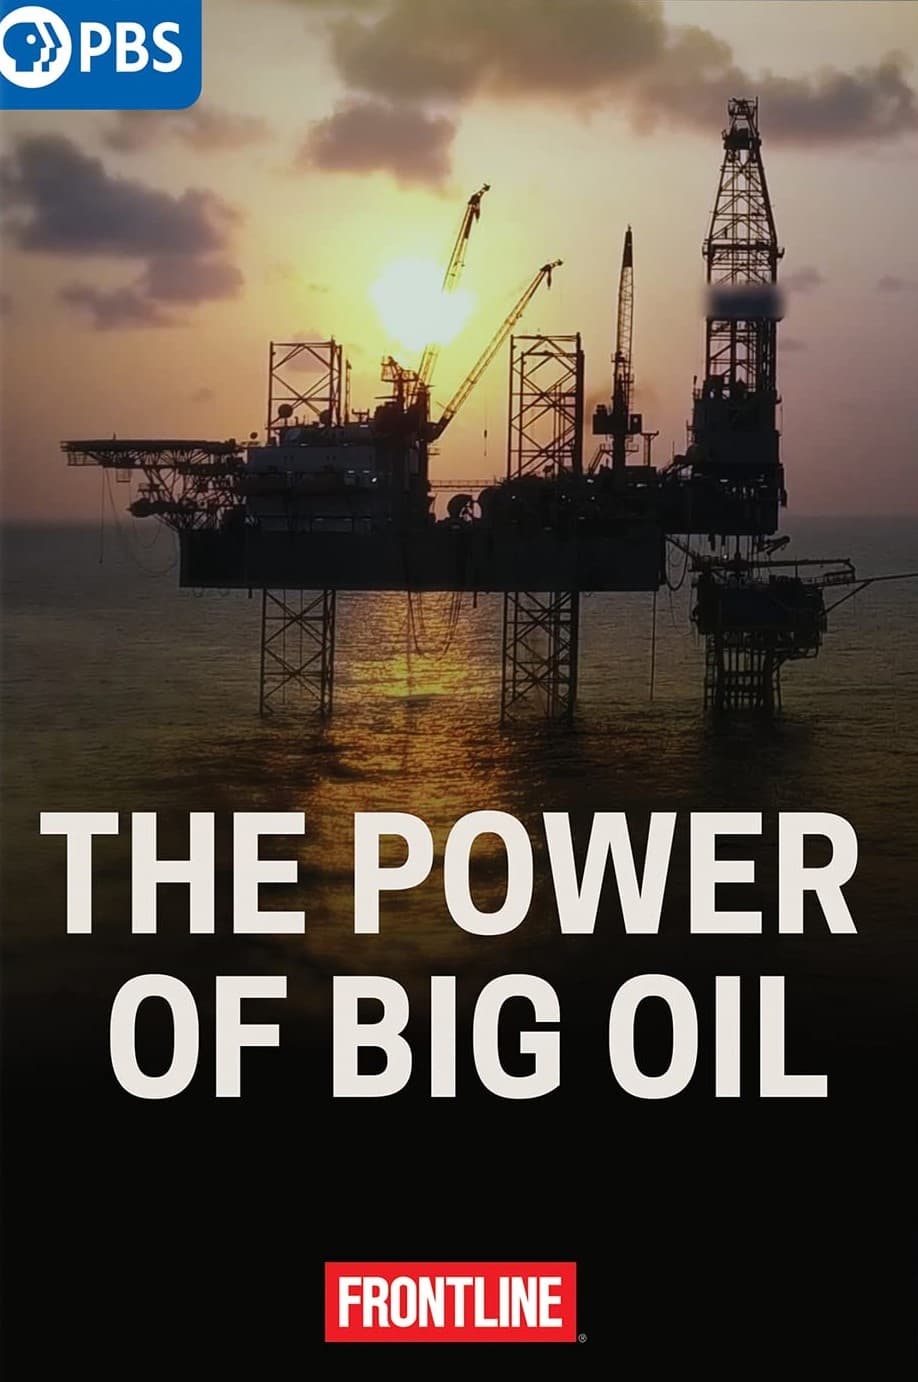 The Power of Big Oil (2022)